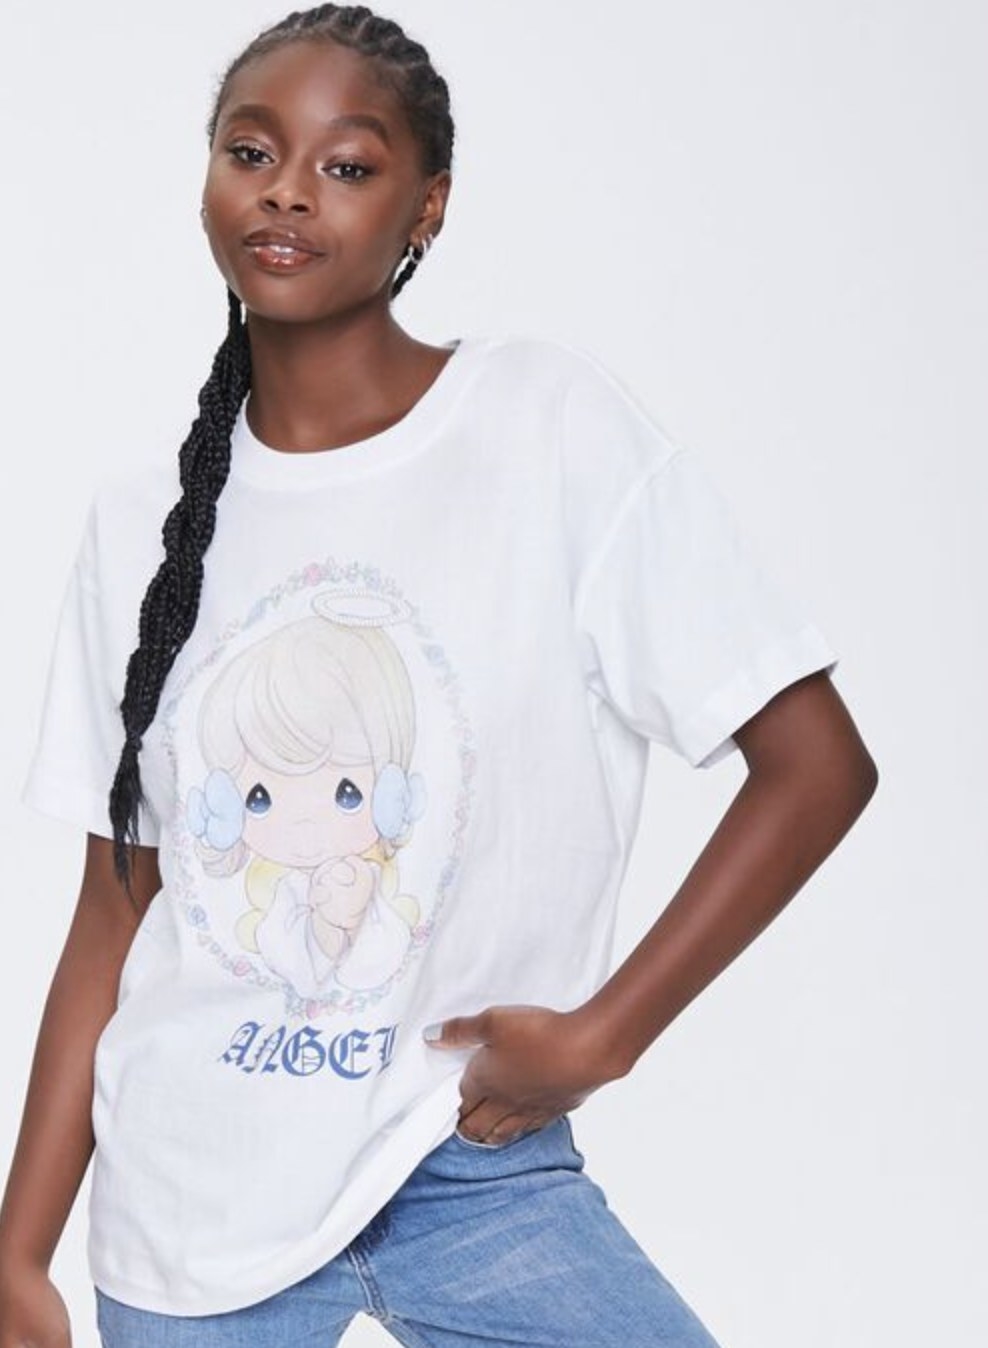 Model is wearing a white graphic tee of an angel and blue jeans